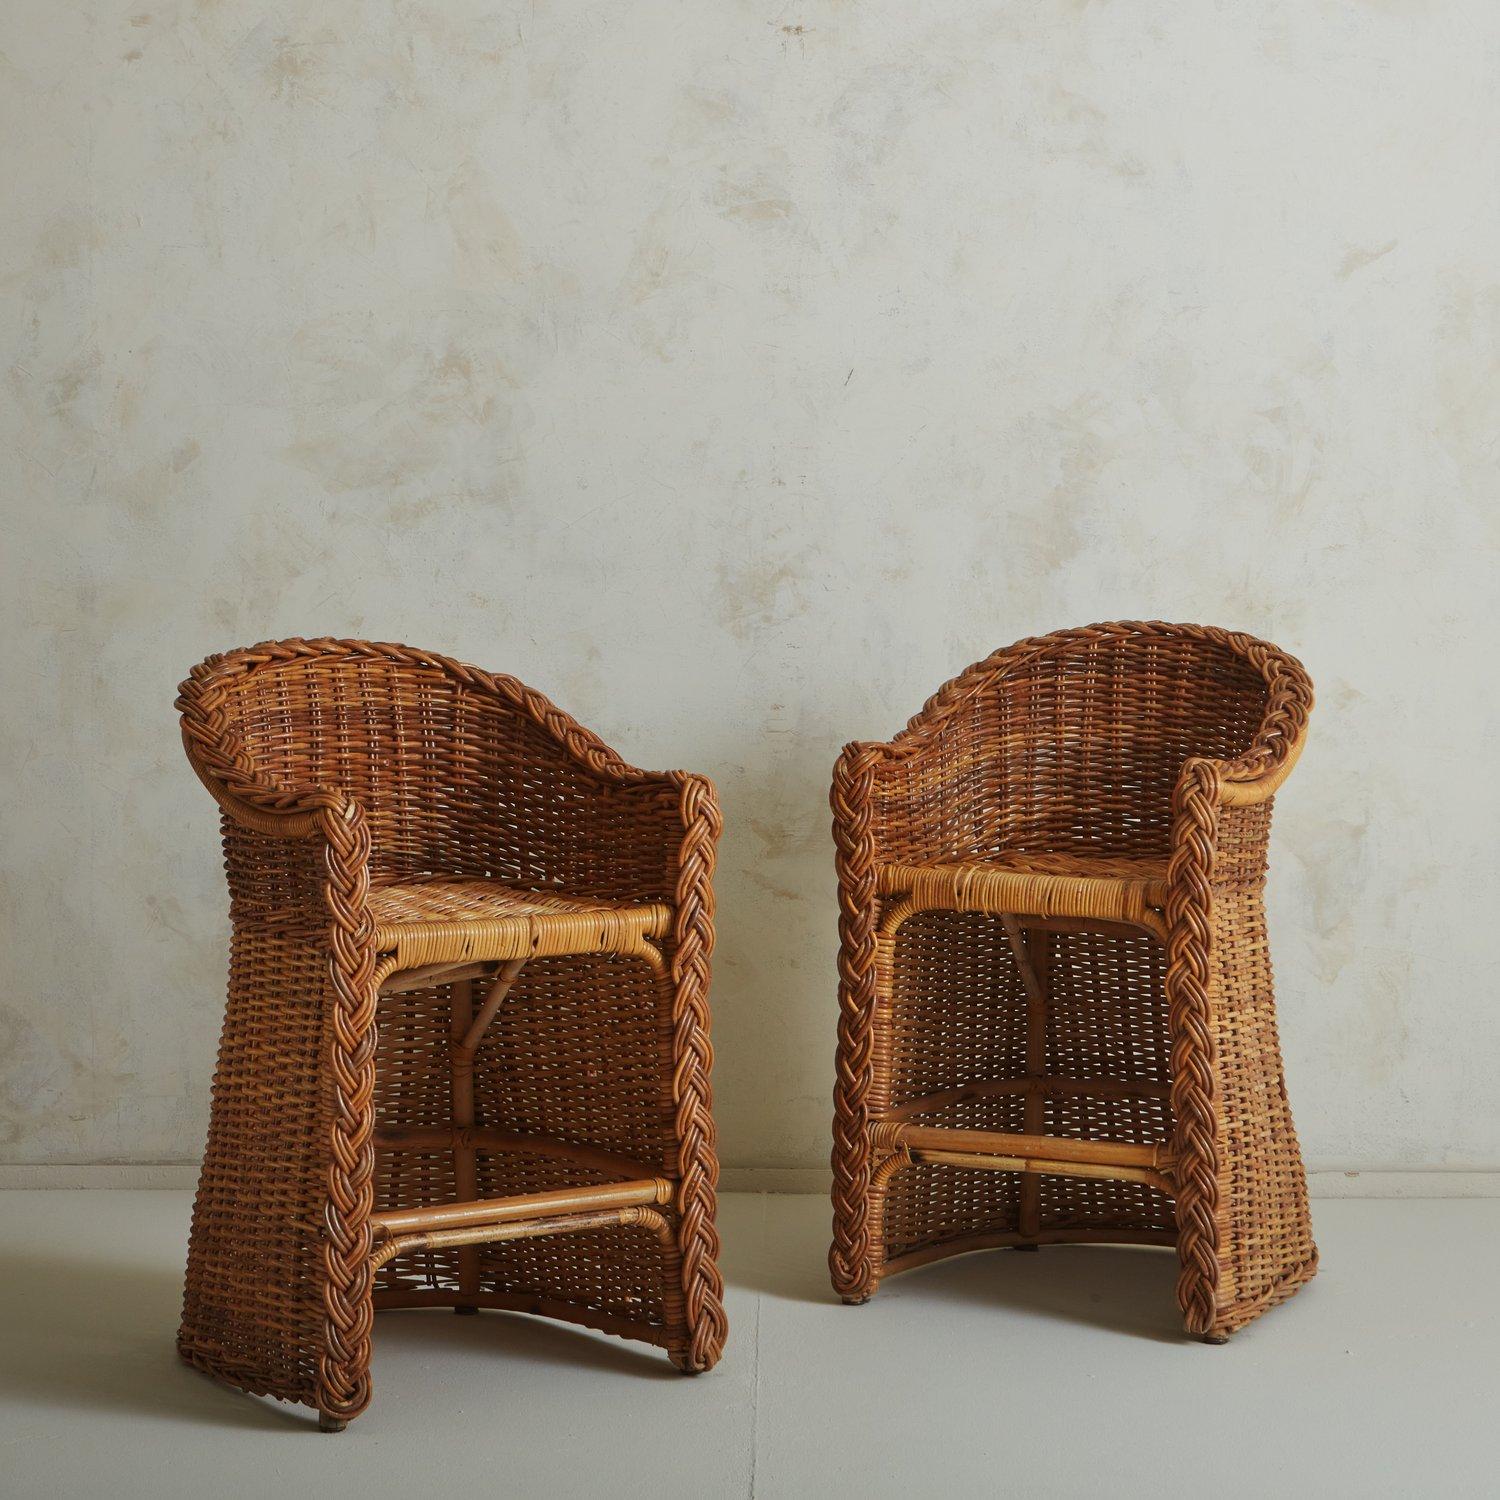 A pair of vintage wicker and cane bar stools with barrel frames and a beautiful braided trim. These stools have curved armrests and a foot support bar. We love the subtle color variations, warmth and durability of these natural materials. 20th